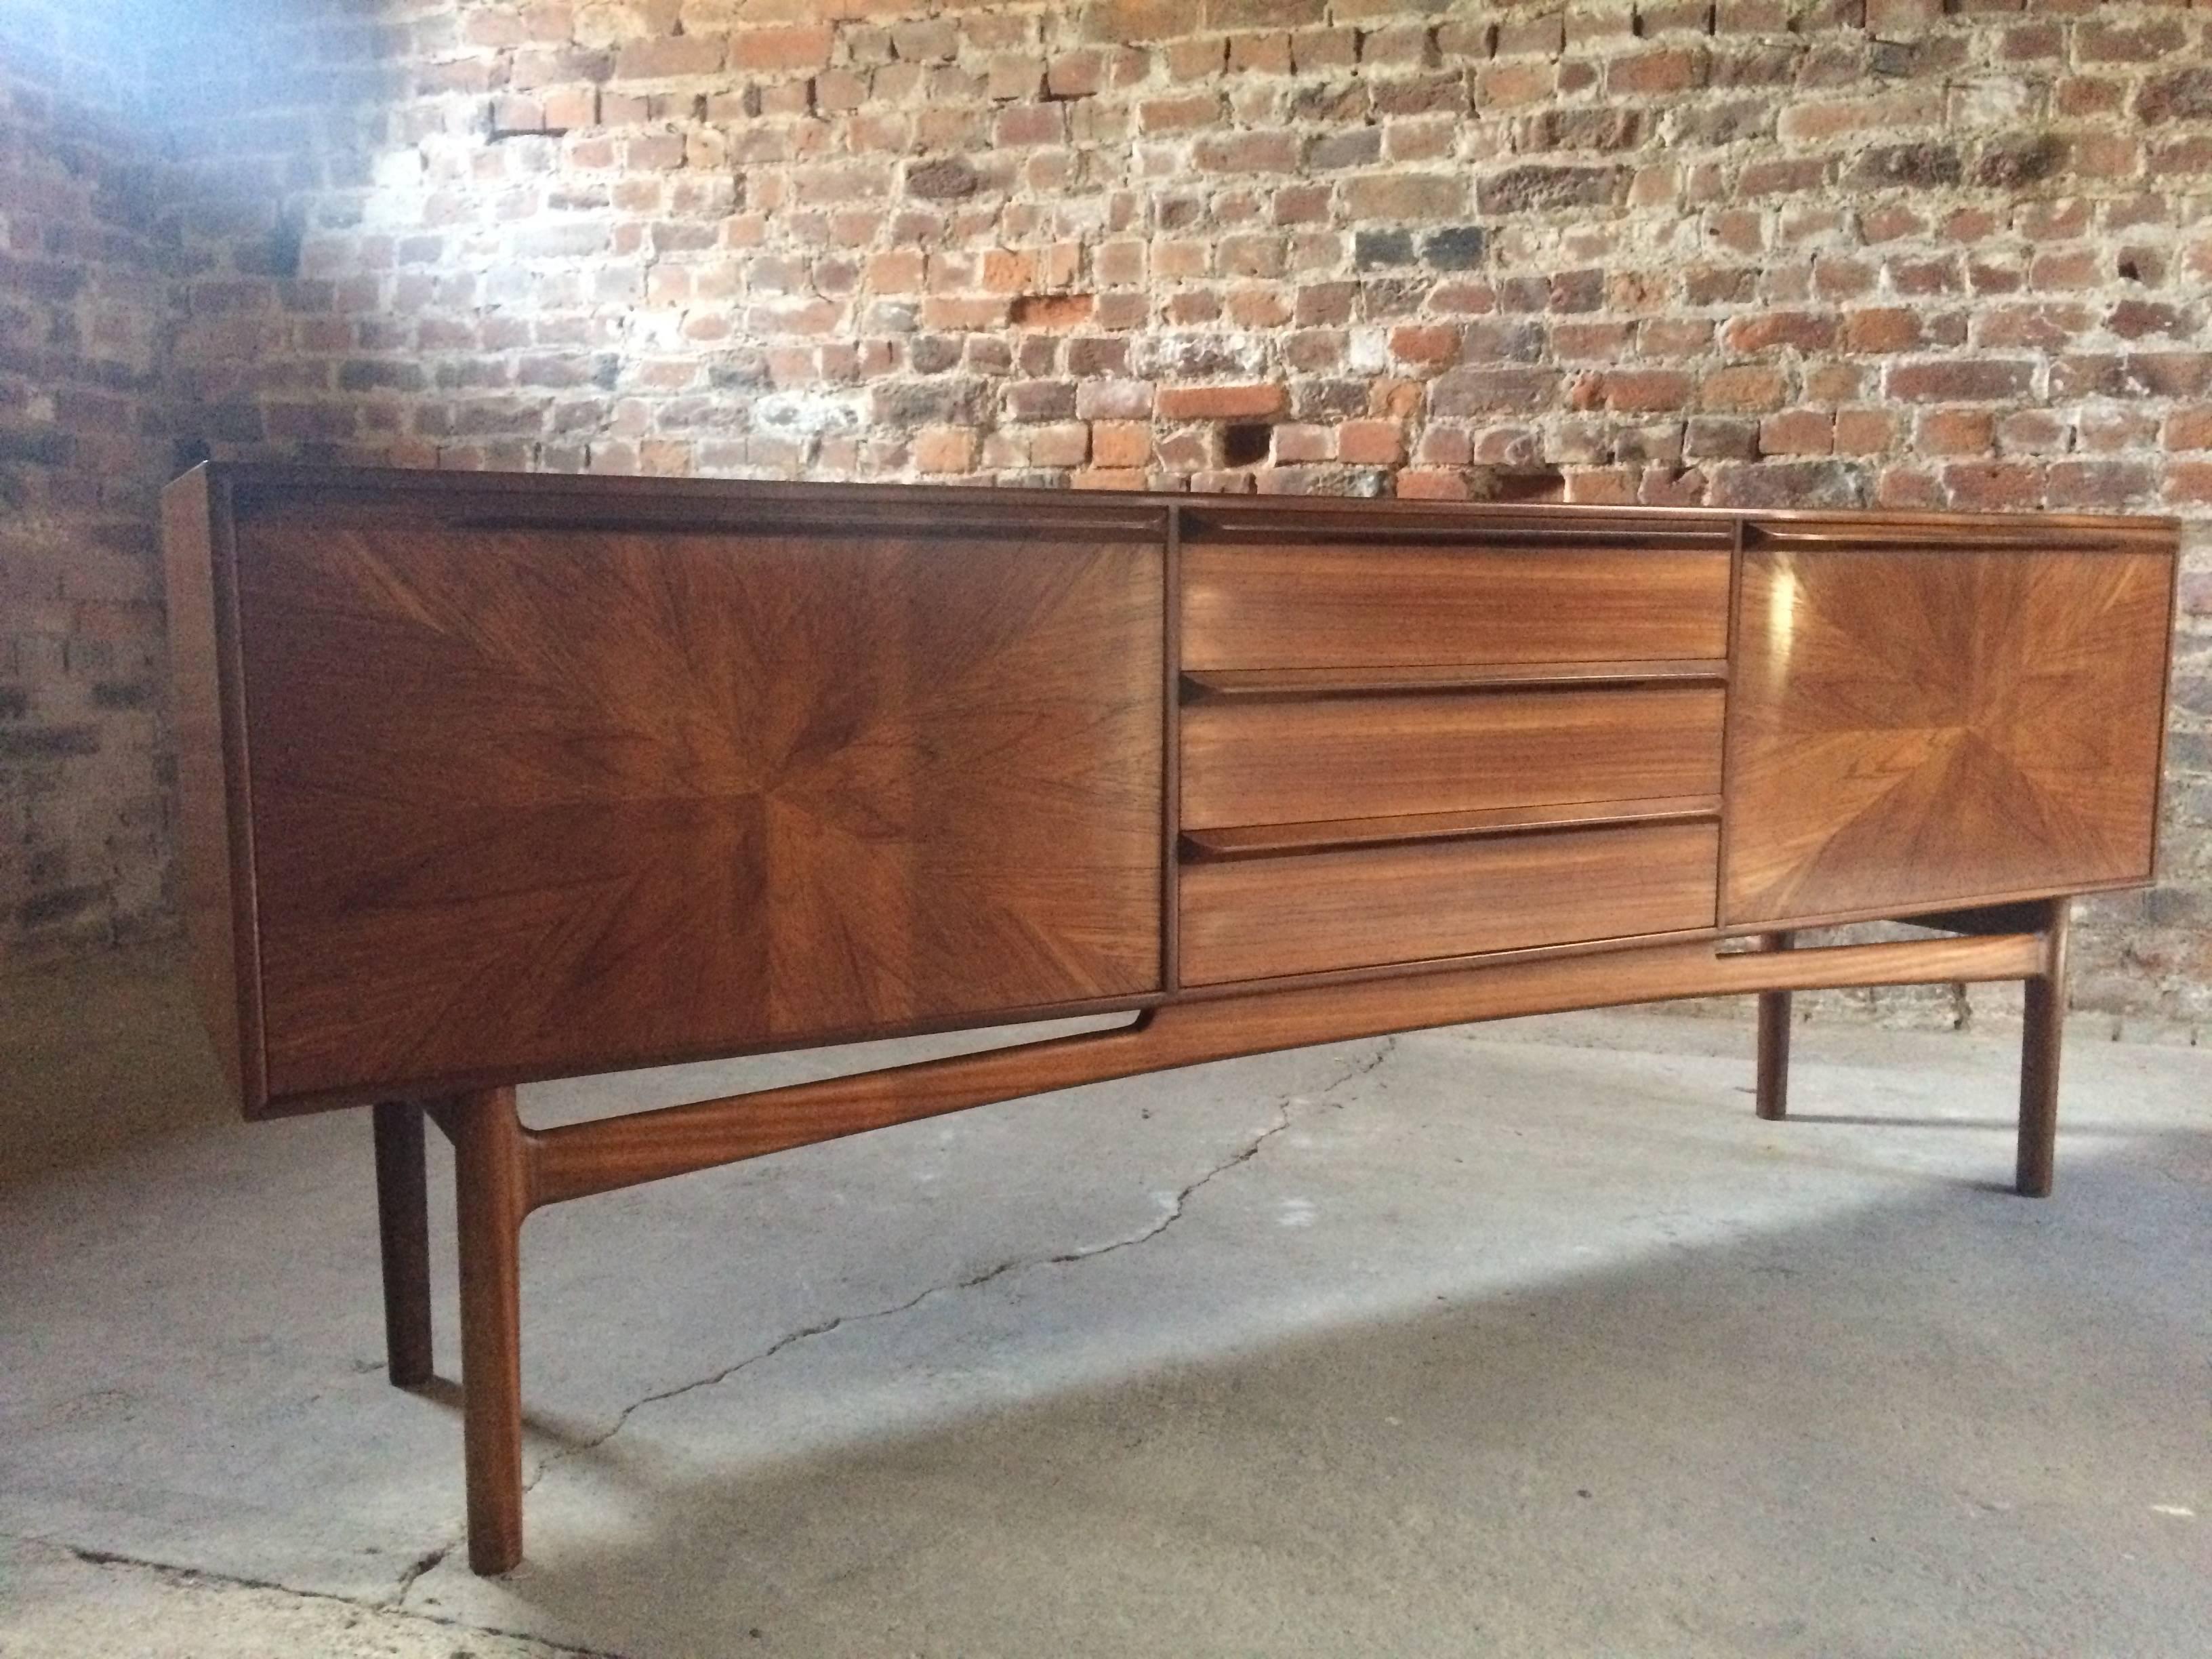 Fabulous rare midcentury A H McIntosh of Kirkaldy Scotland solid teak 'Sunburst' credenza sideboard, circa 1960s, the sideboard is offered in superb condition with no marks or stains having just undergone a full restoration, the rectangular top over